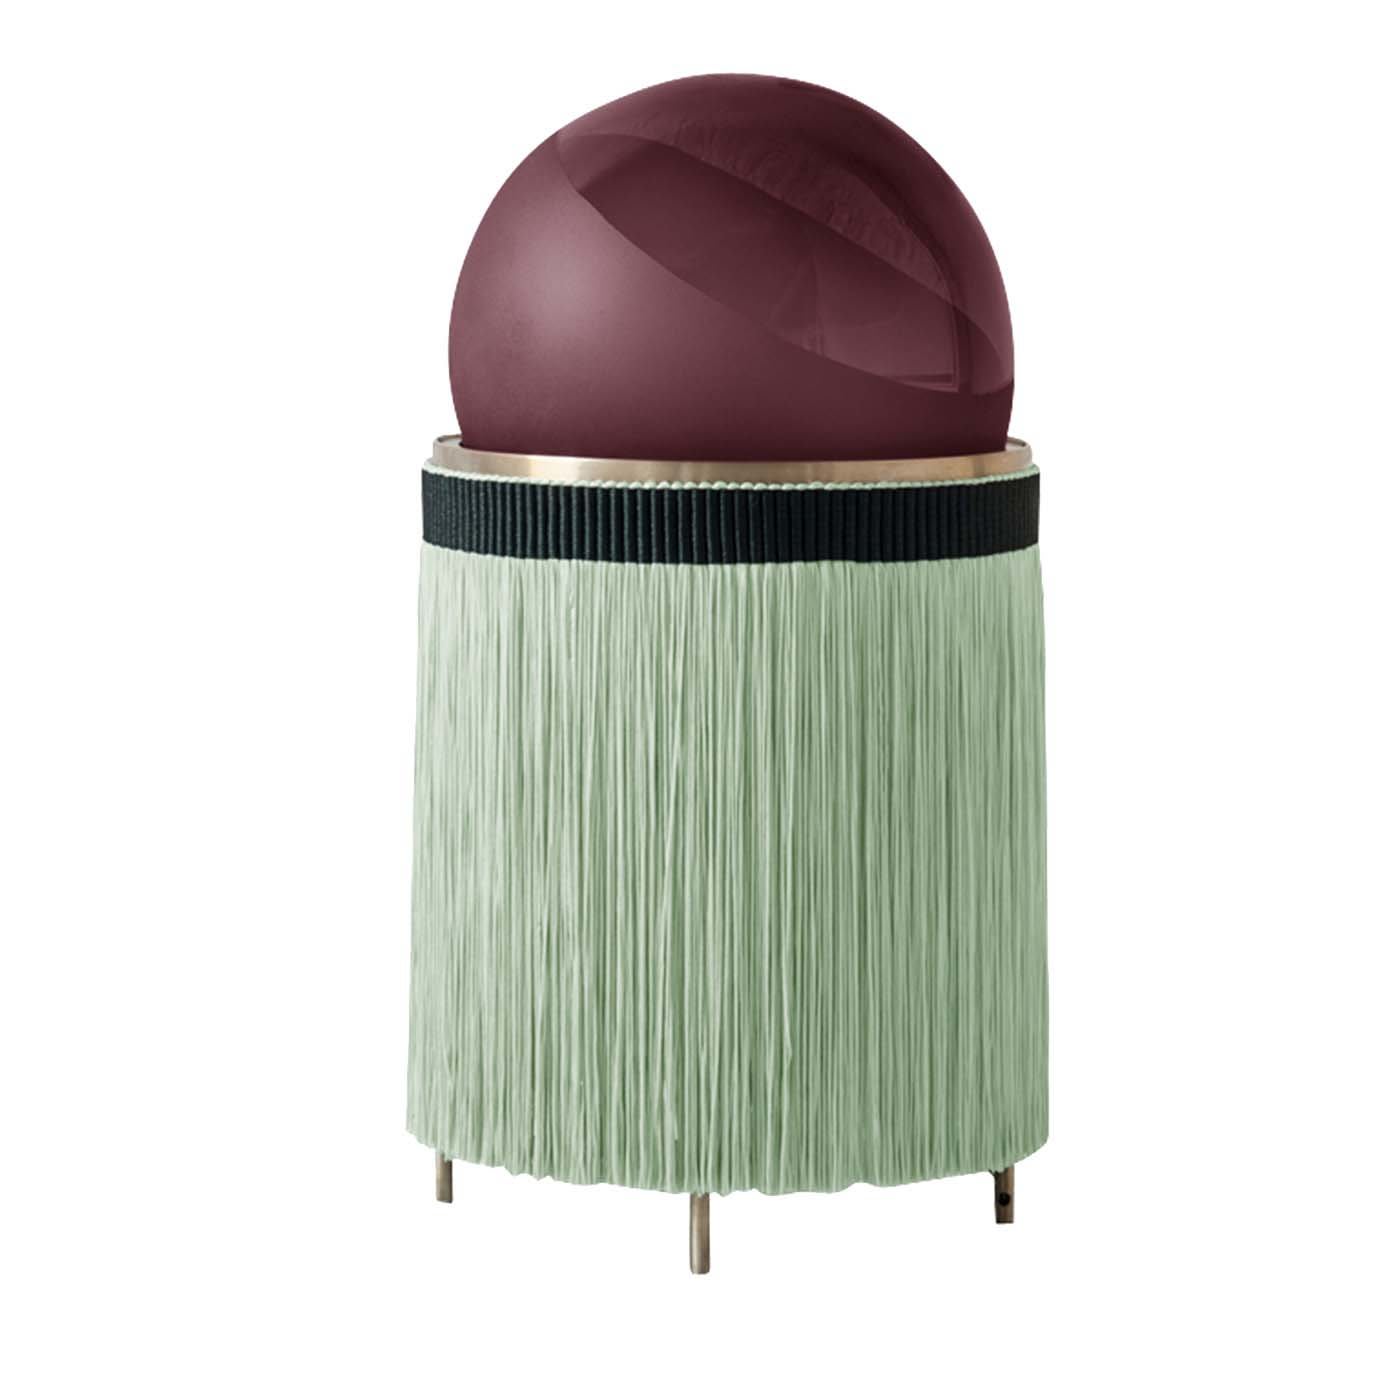 Normanna Floor Lamp in Amethyst Pink and Green by Vi+M - Purho